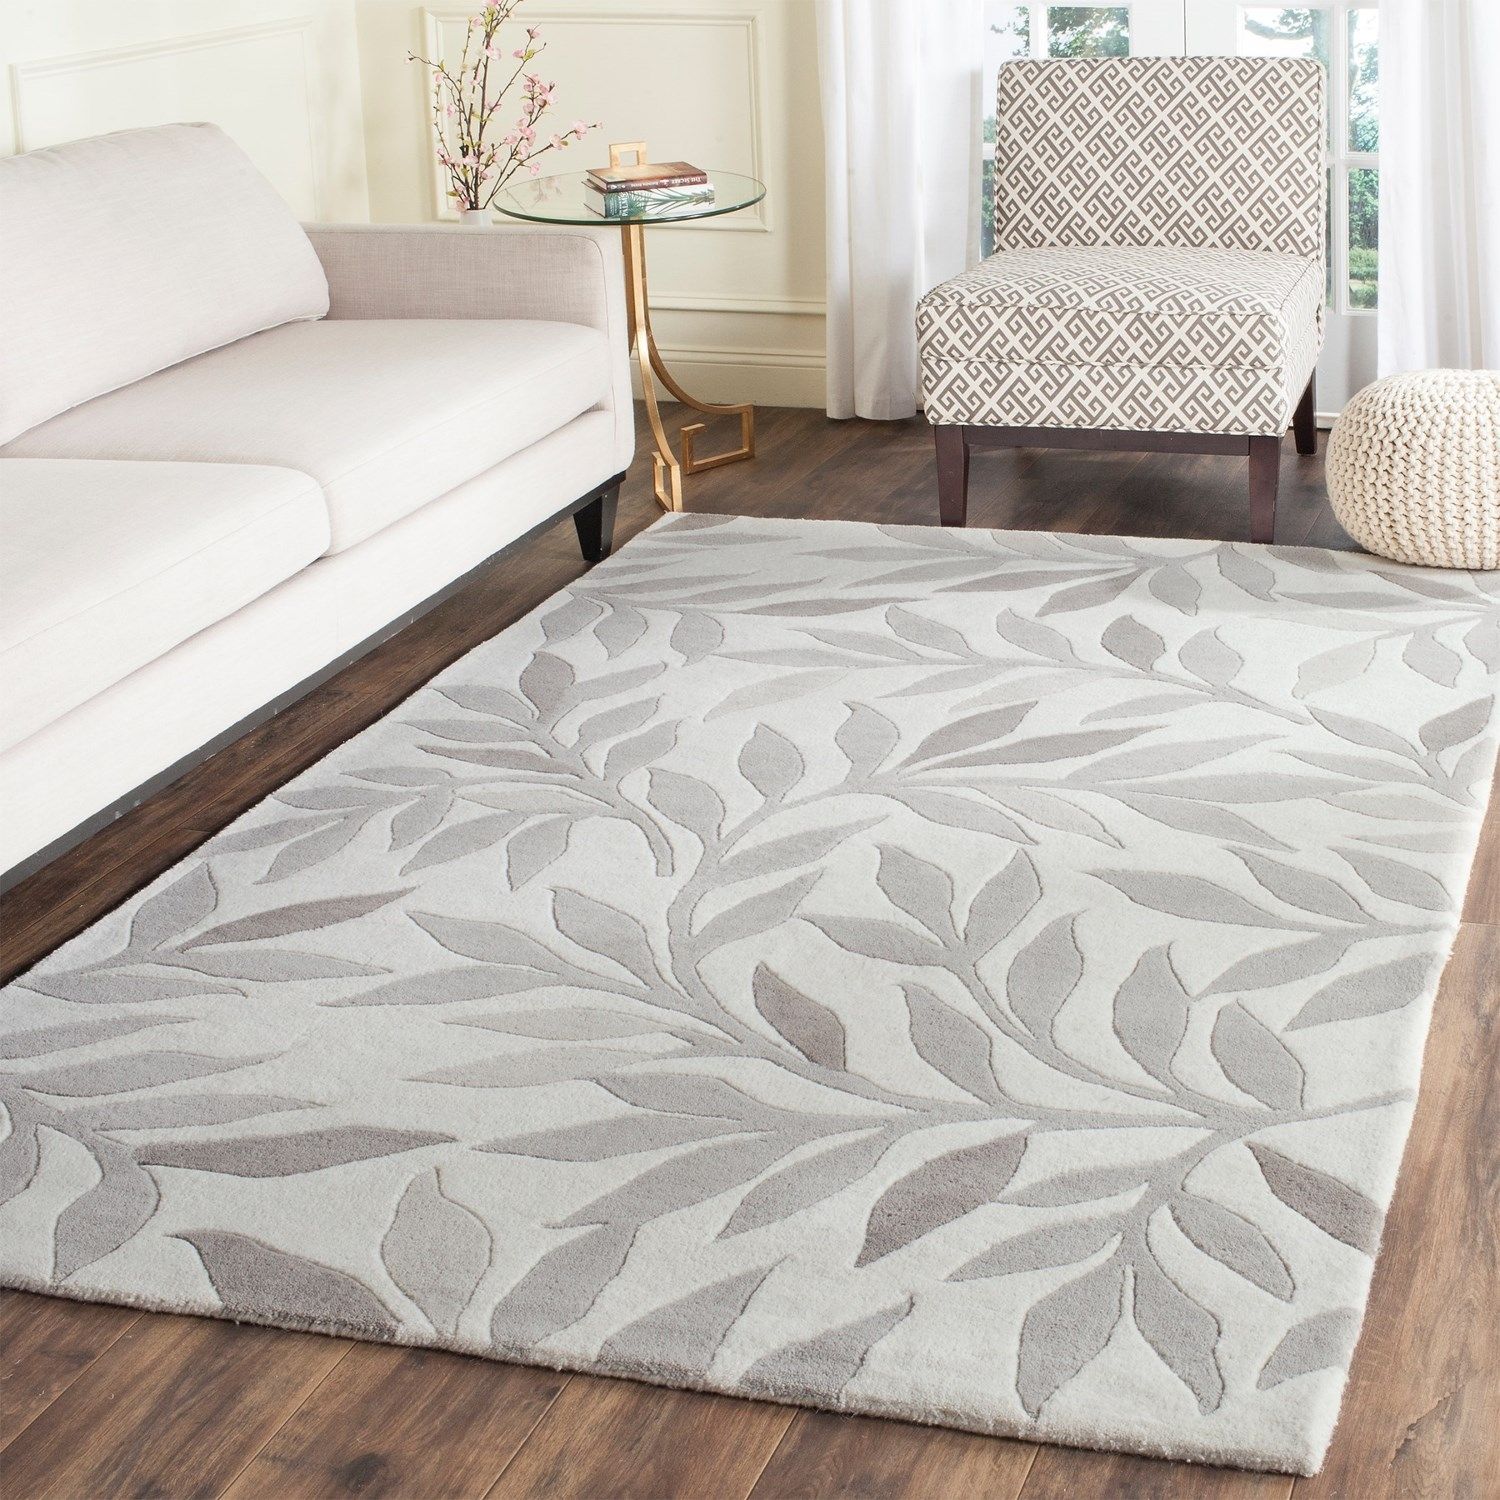 Martha Stewart Hand Tufted Wool Area Rug 4×6 Save 31 Intended For 4×6 Wool Area Rugs (View 8 of 15)